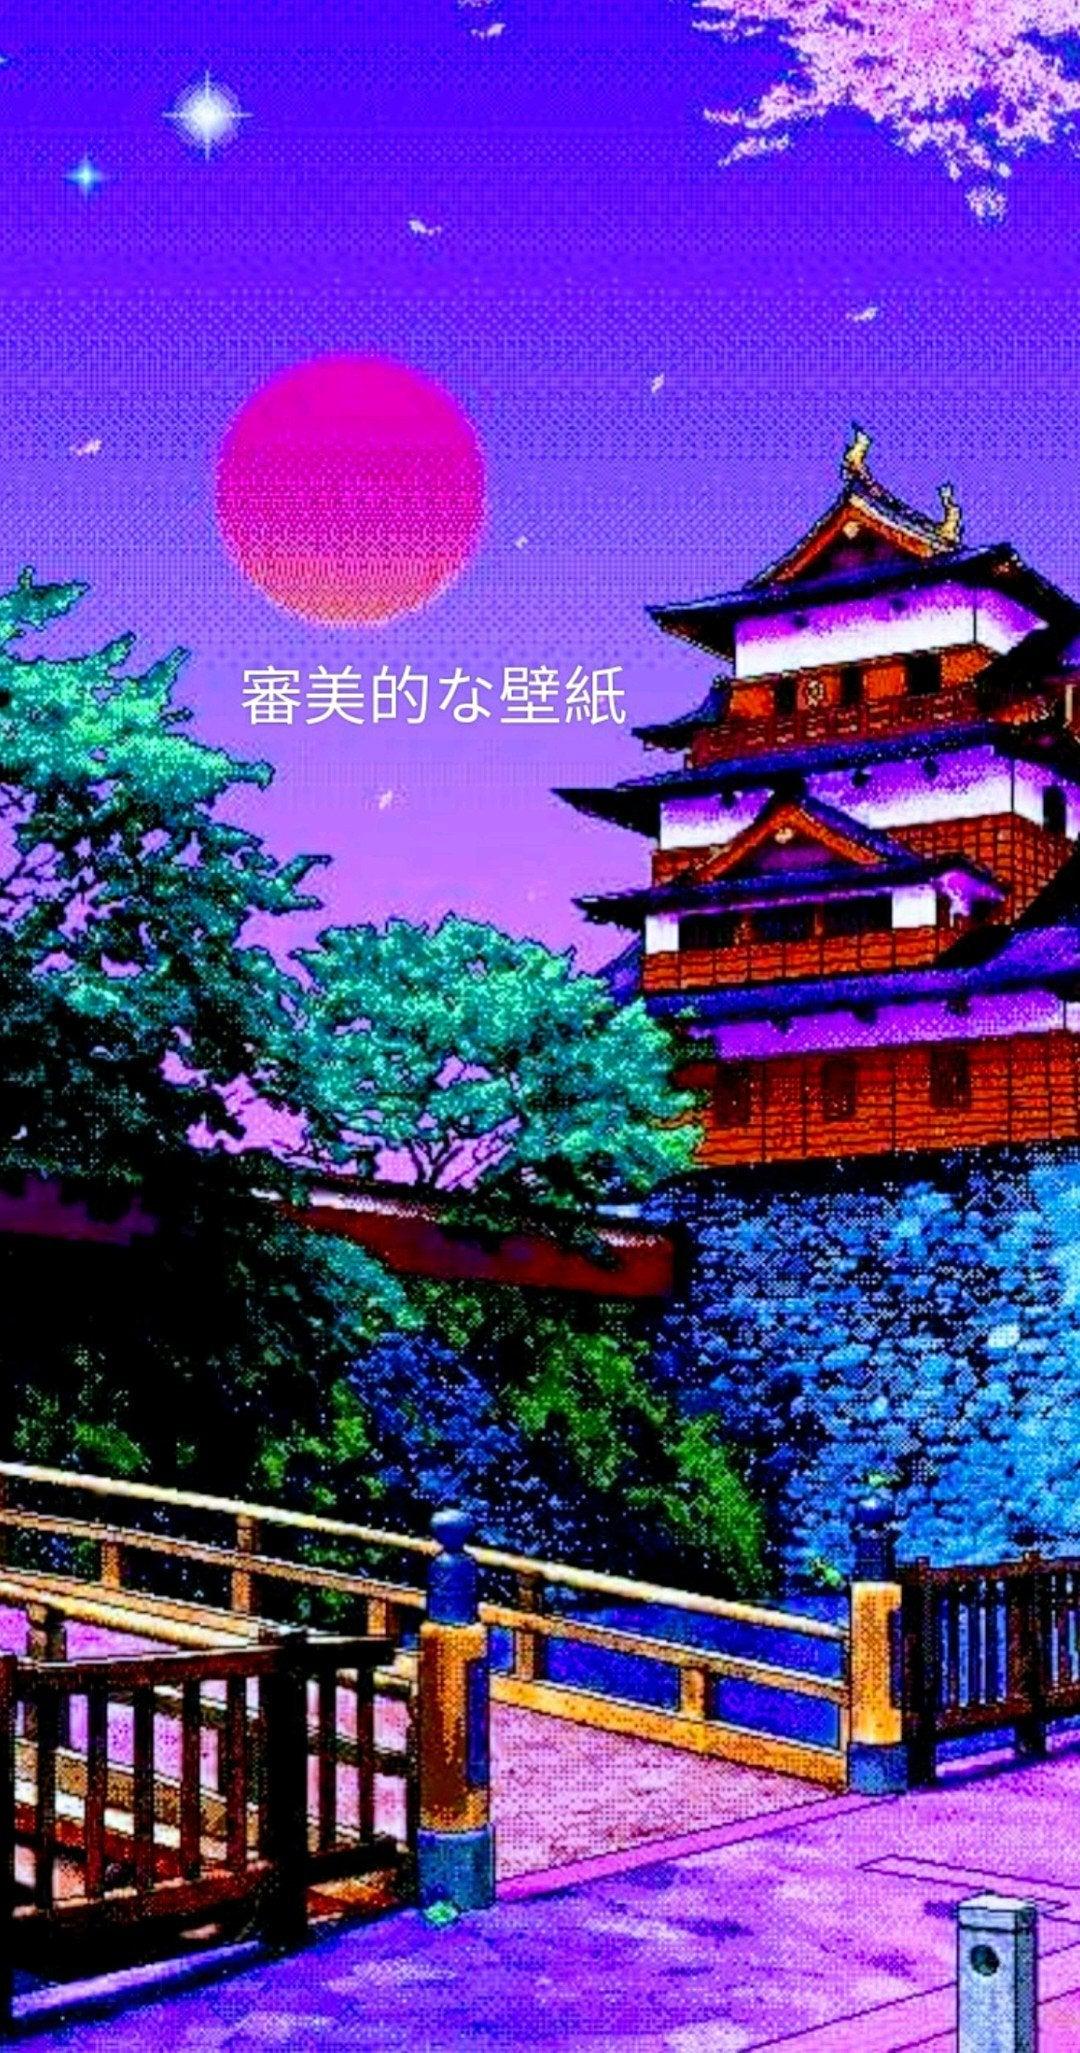 Aesthetic Hd Japanese Wallpapers - Free HD Wallpapers